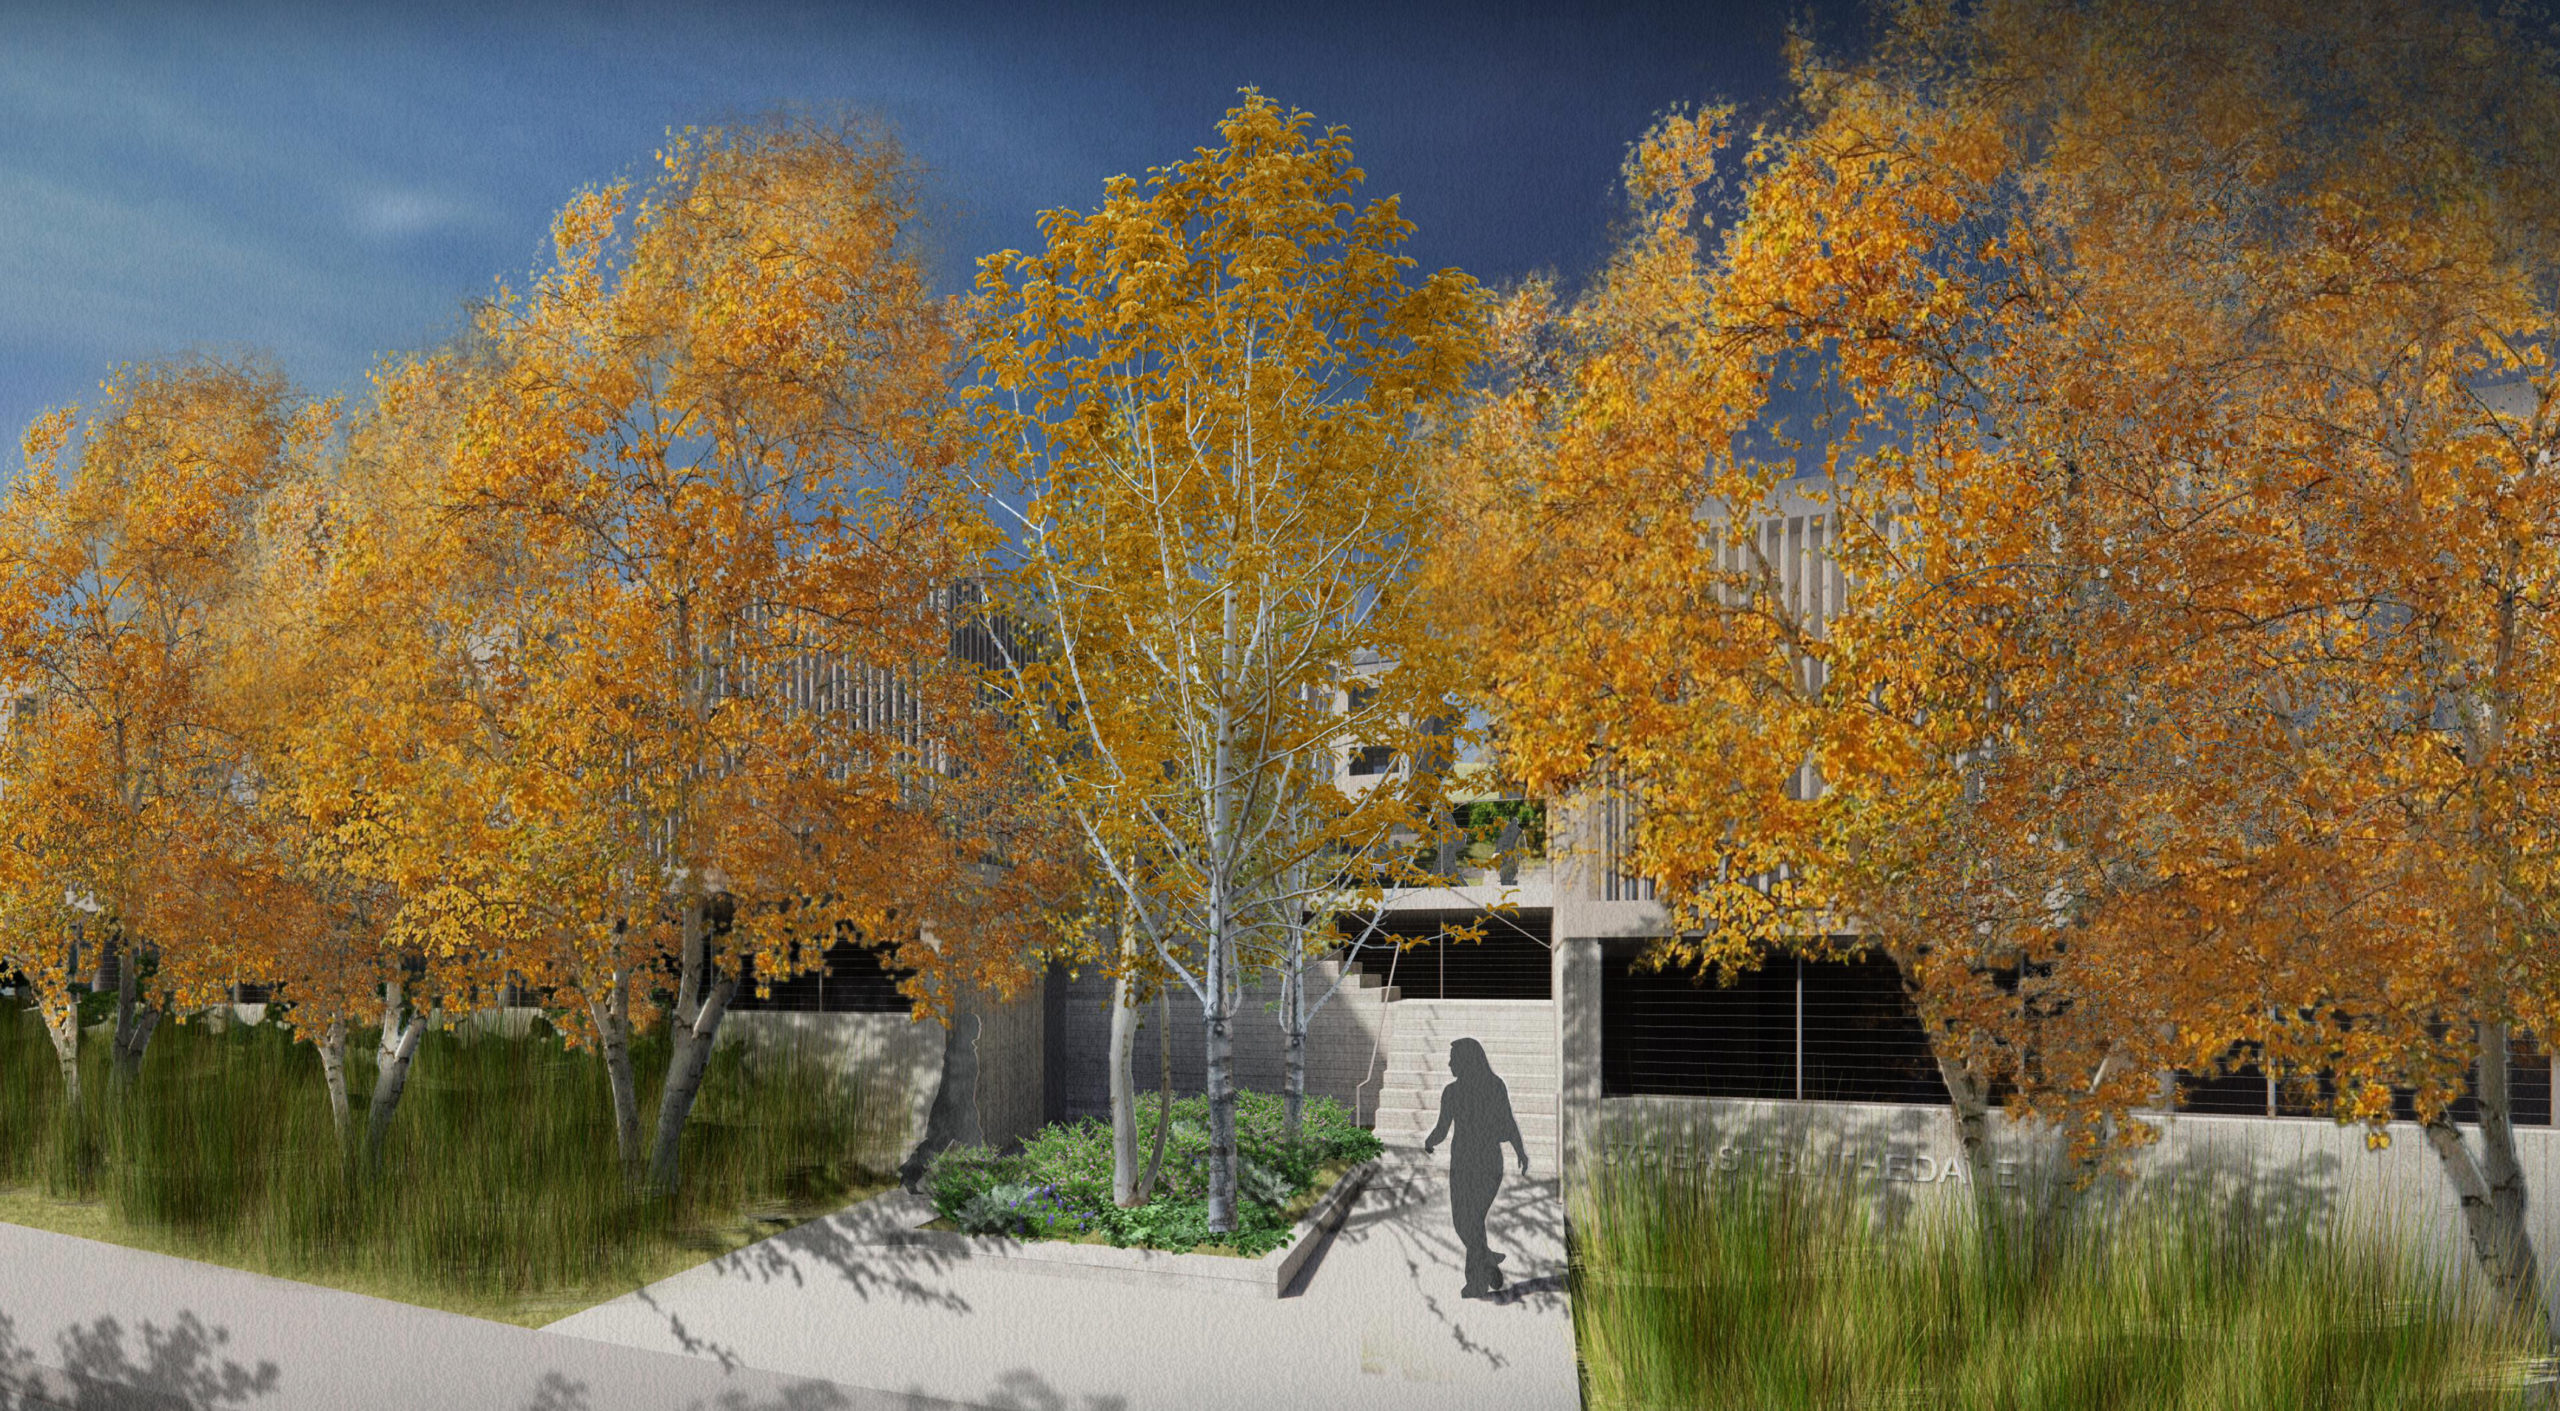 575 East Blithedale Avenue treescape shown, rendering by Mark Cavagnero Associates and Wright Architecture Studio